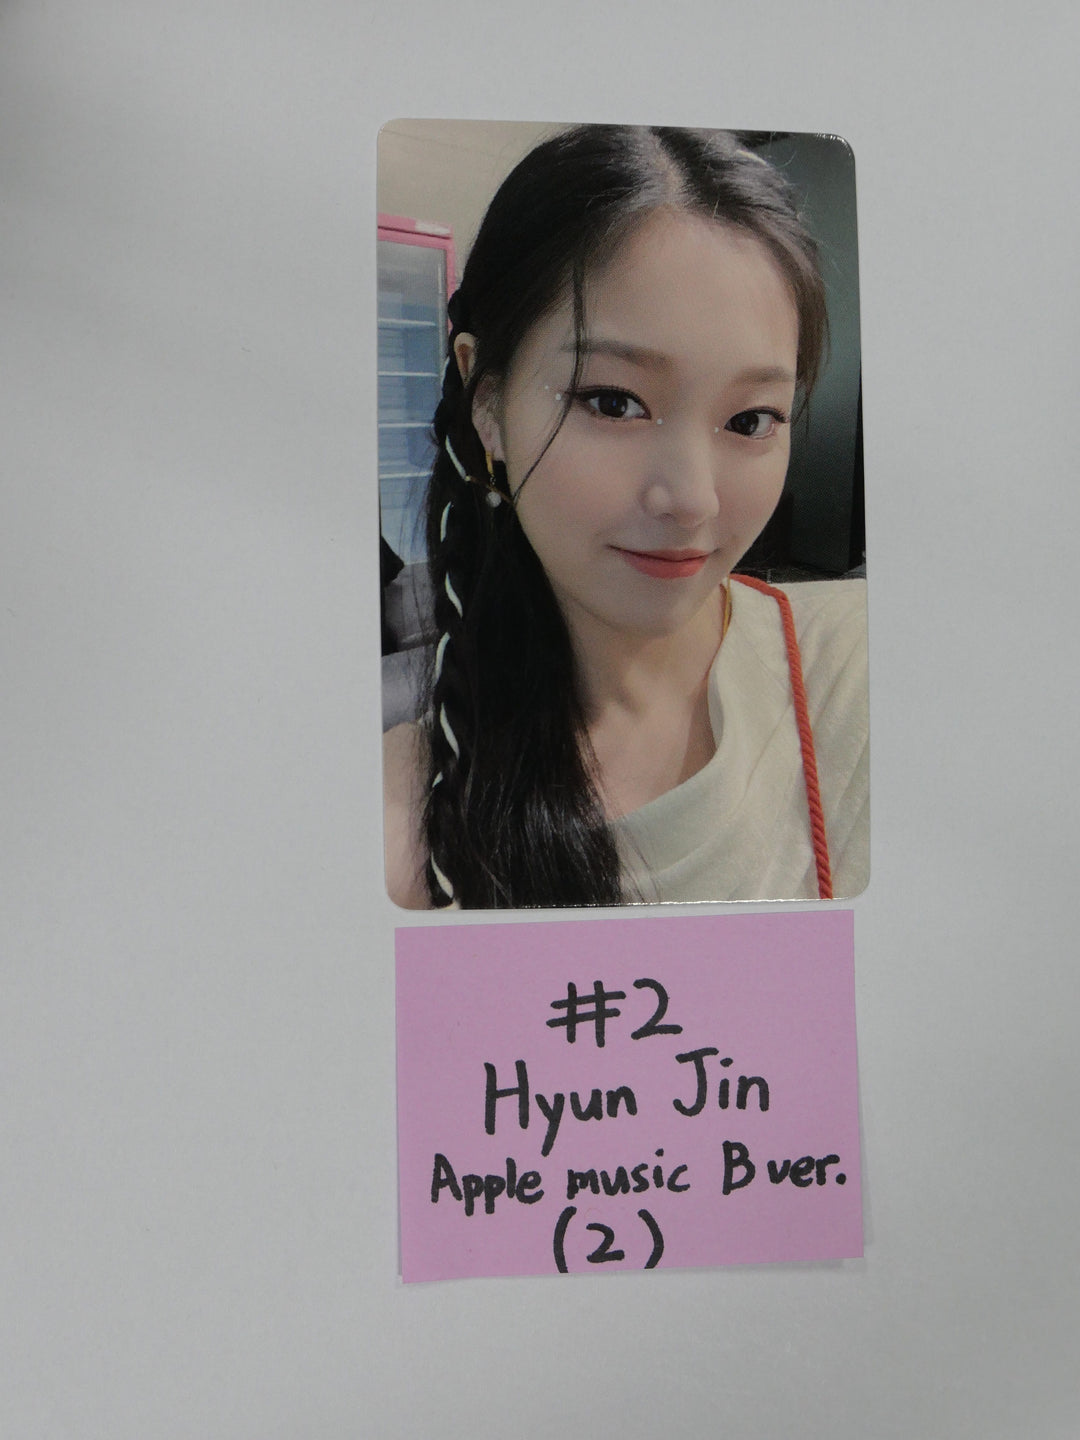 Loona '&' - Applemusic Fan Sign Event Photocard Ver. 2 (Updated 7-16)